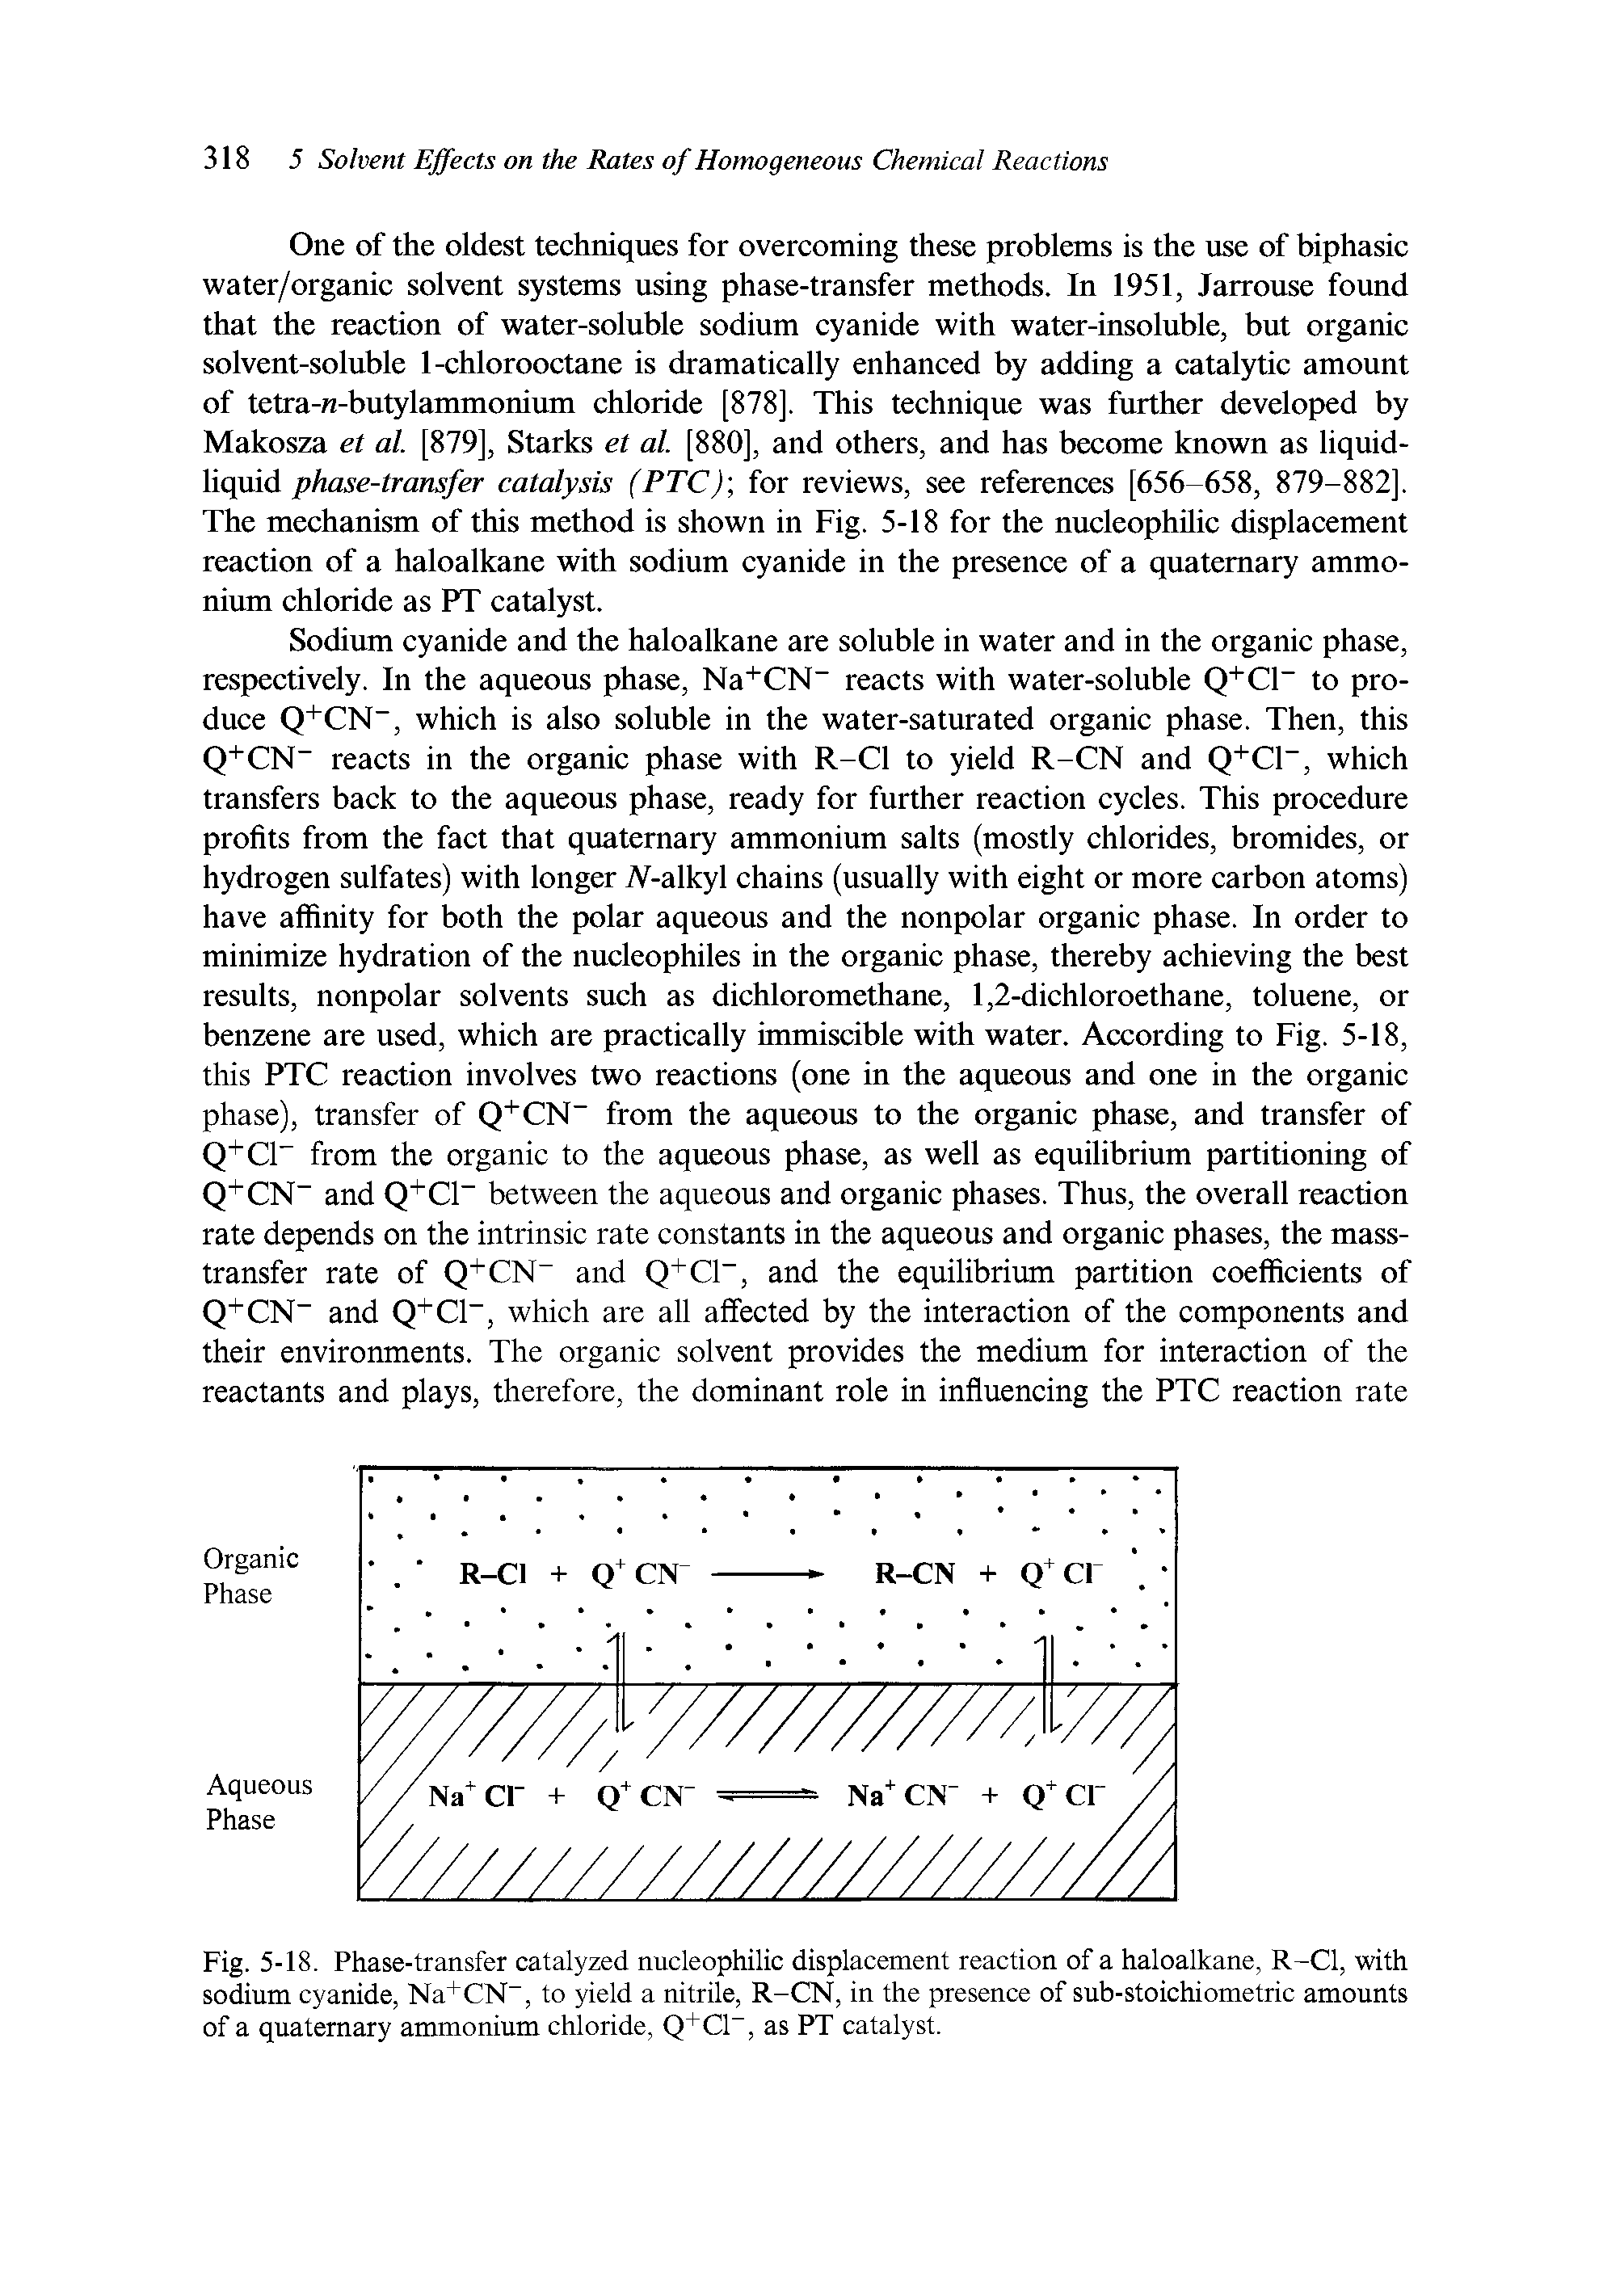 Fig. 5-18. Phase-transfer catalyzed nucleophilic displacement reaction of a haloalkane, R-Cl, with sodium cyanide, Na+CN , to yield a nitrile, R-CN, in the presence of sub-stoichiometric amounts of a quaternary ammonium chloride, Q+CP, as PT catalyst.